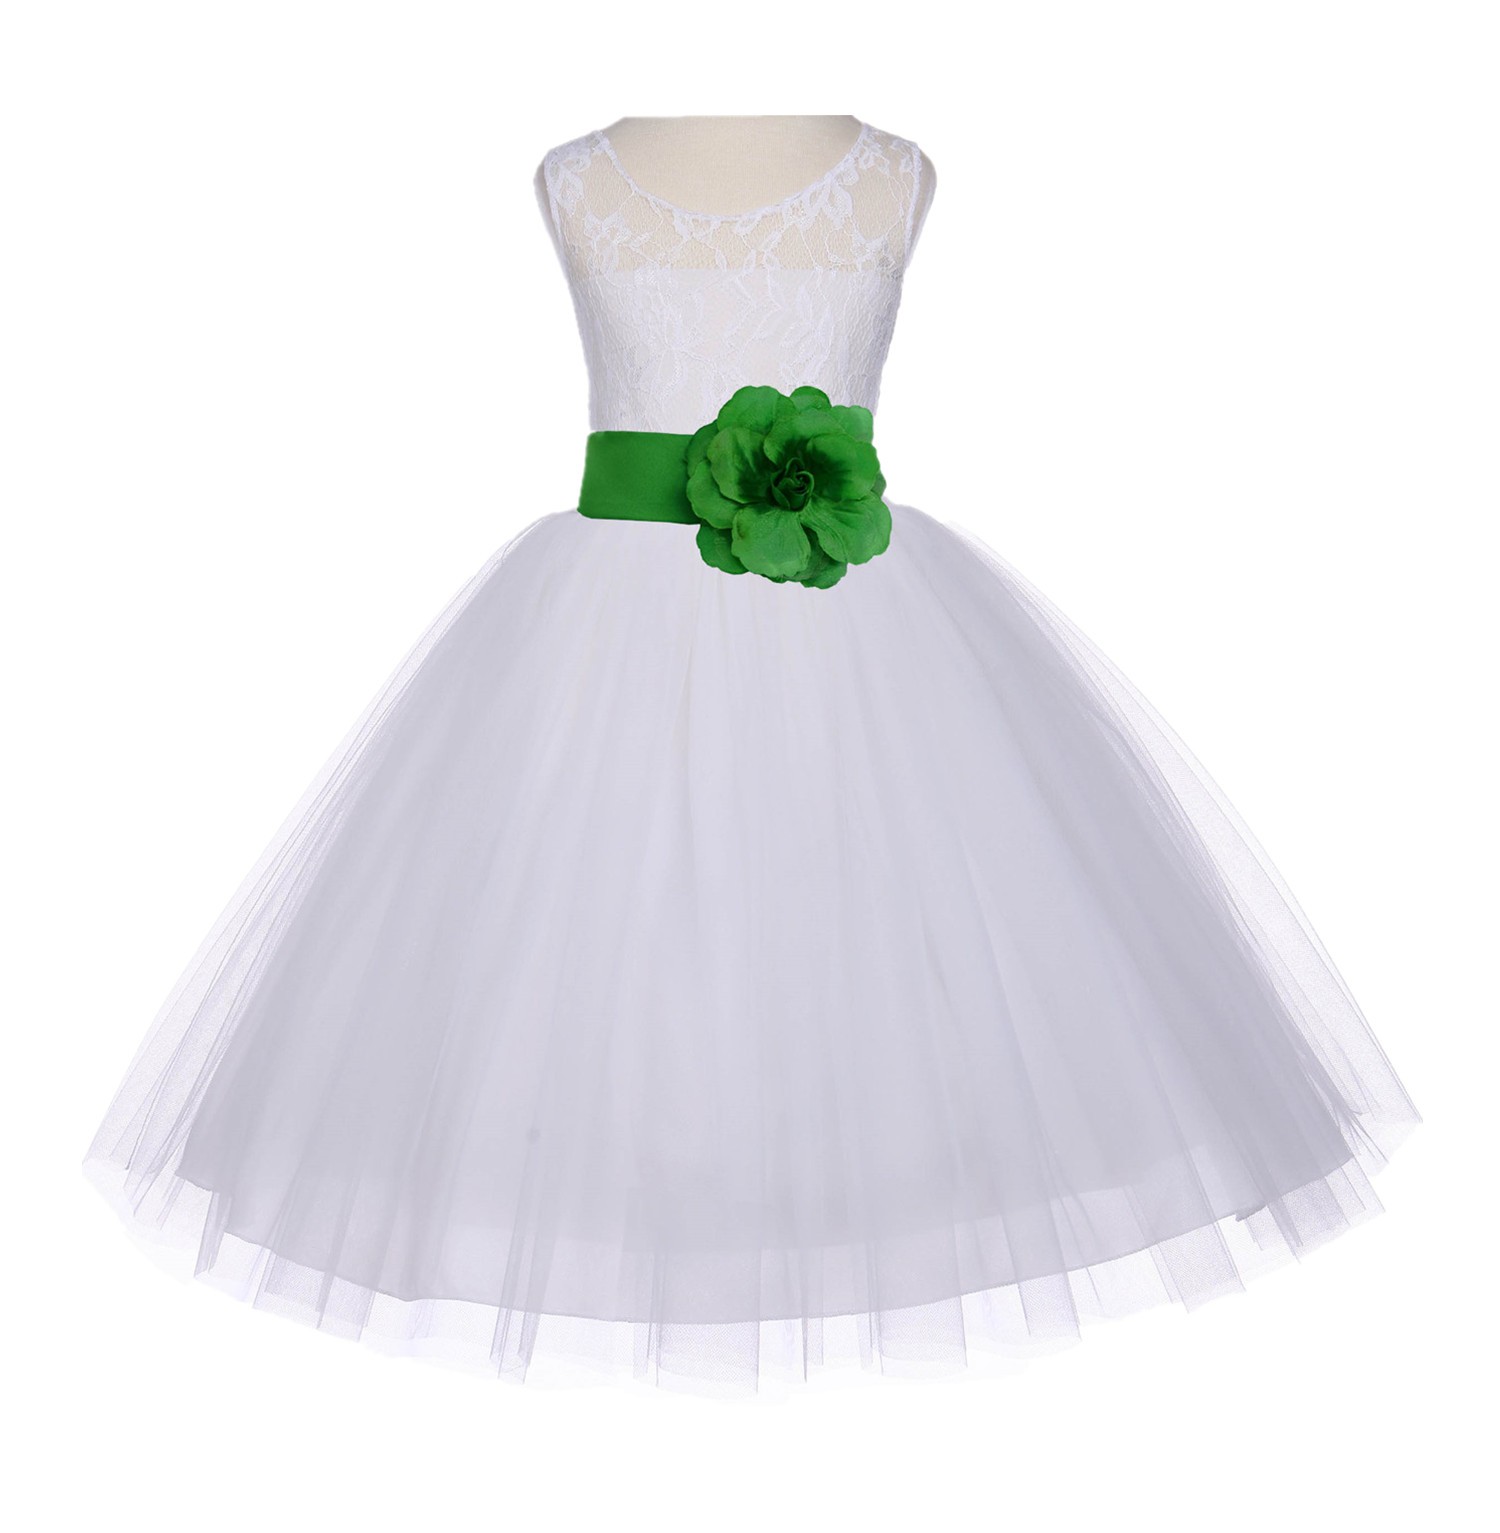 Ivory/Lime Floral Lace Bodice Tulle Flower Girl Dress Bridesmaid 153S